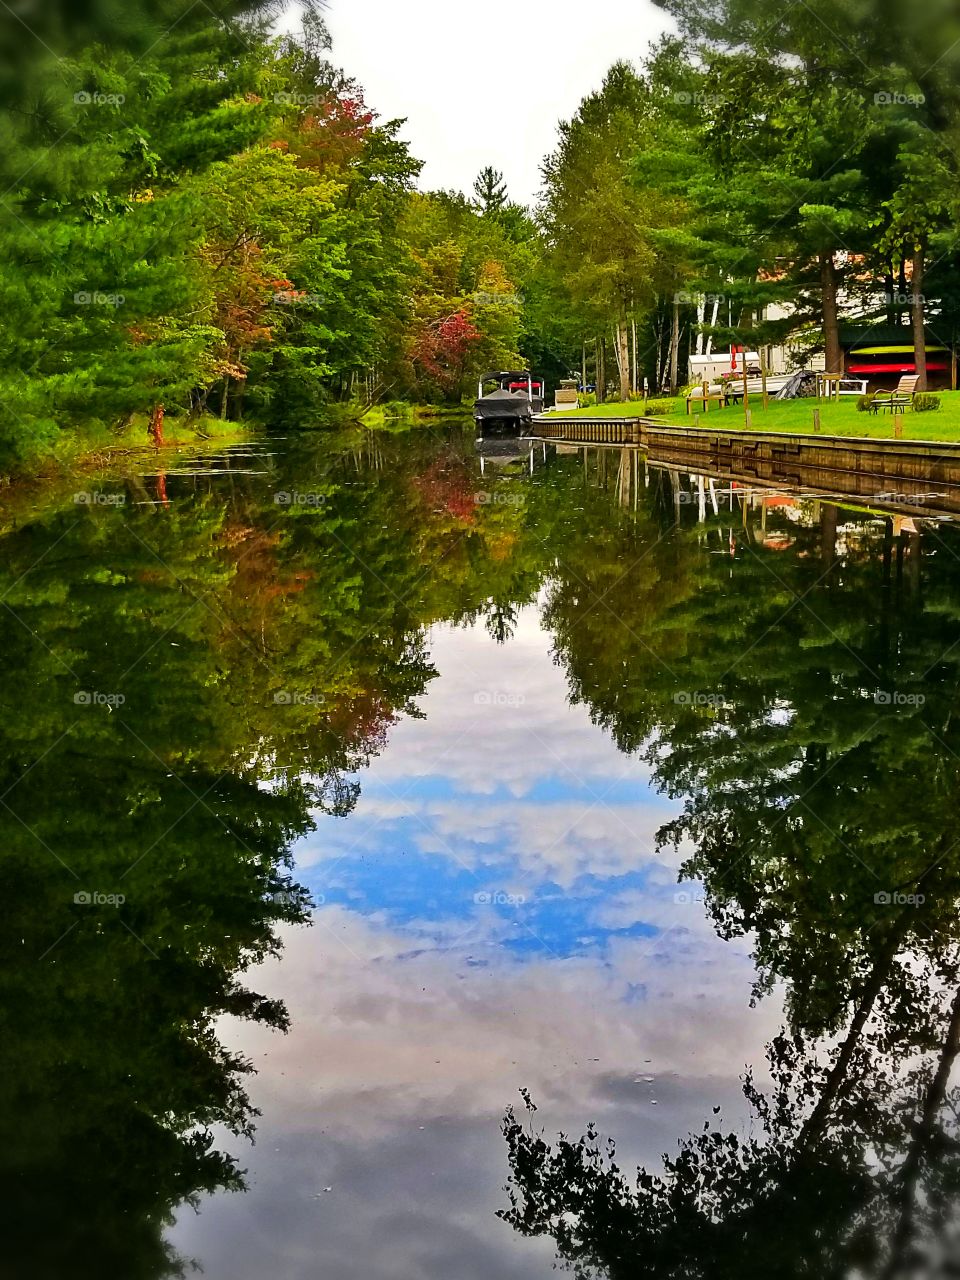 Gorgeous reflection off the water, while boating down a canal.